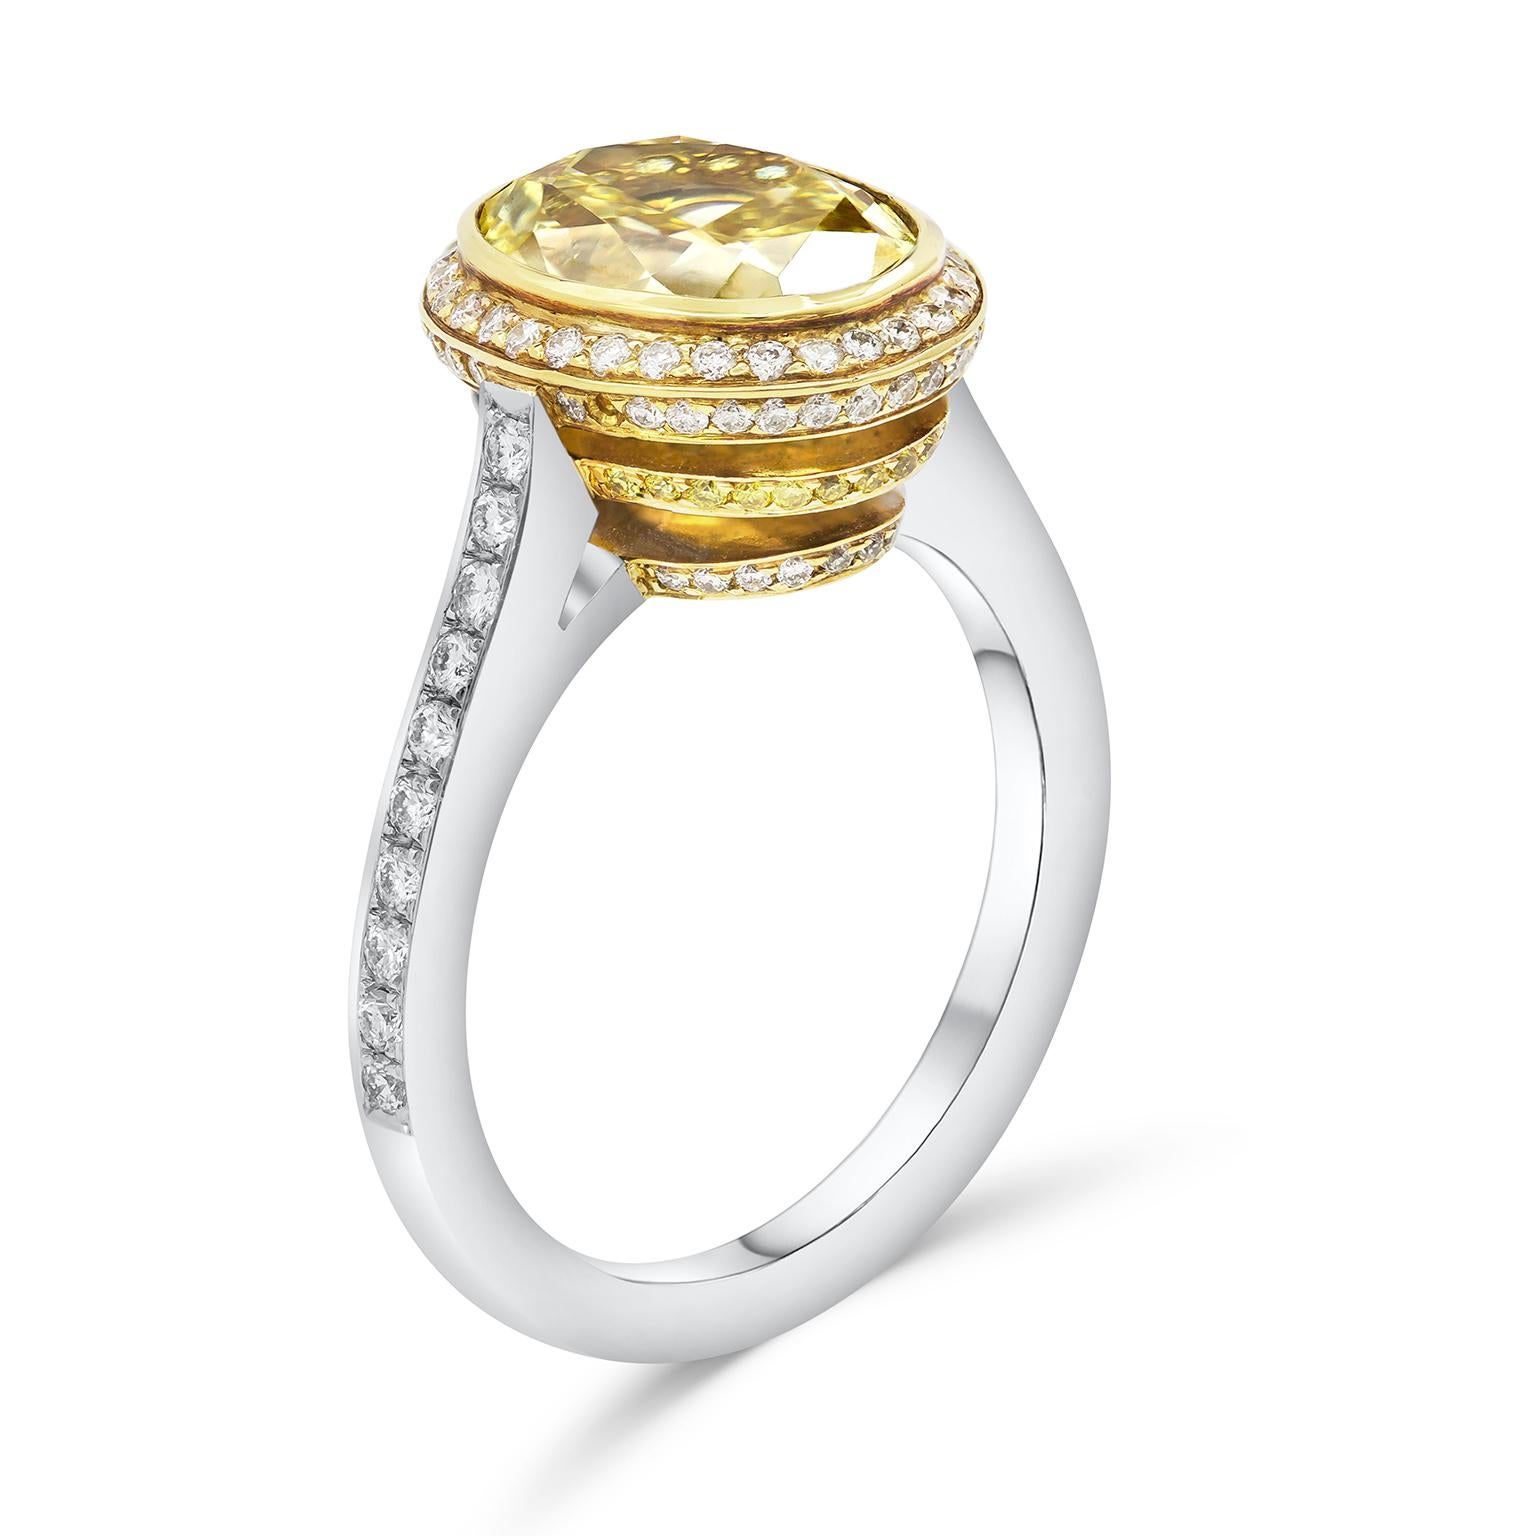 This elegant engagement ring features a color-rich yellow oval cut diamond center that GIA certified as Fancy Intense Yellow color. The diamond is bezel set in 18 karat yellow gold basket accented by a single row of sparkling round diamonds. The